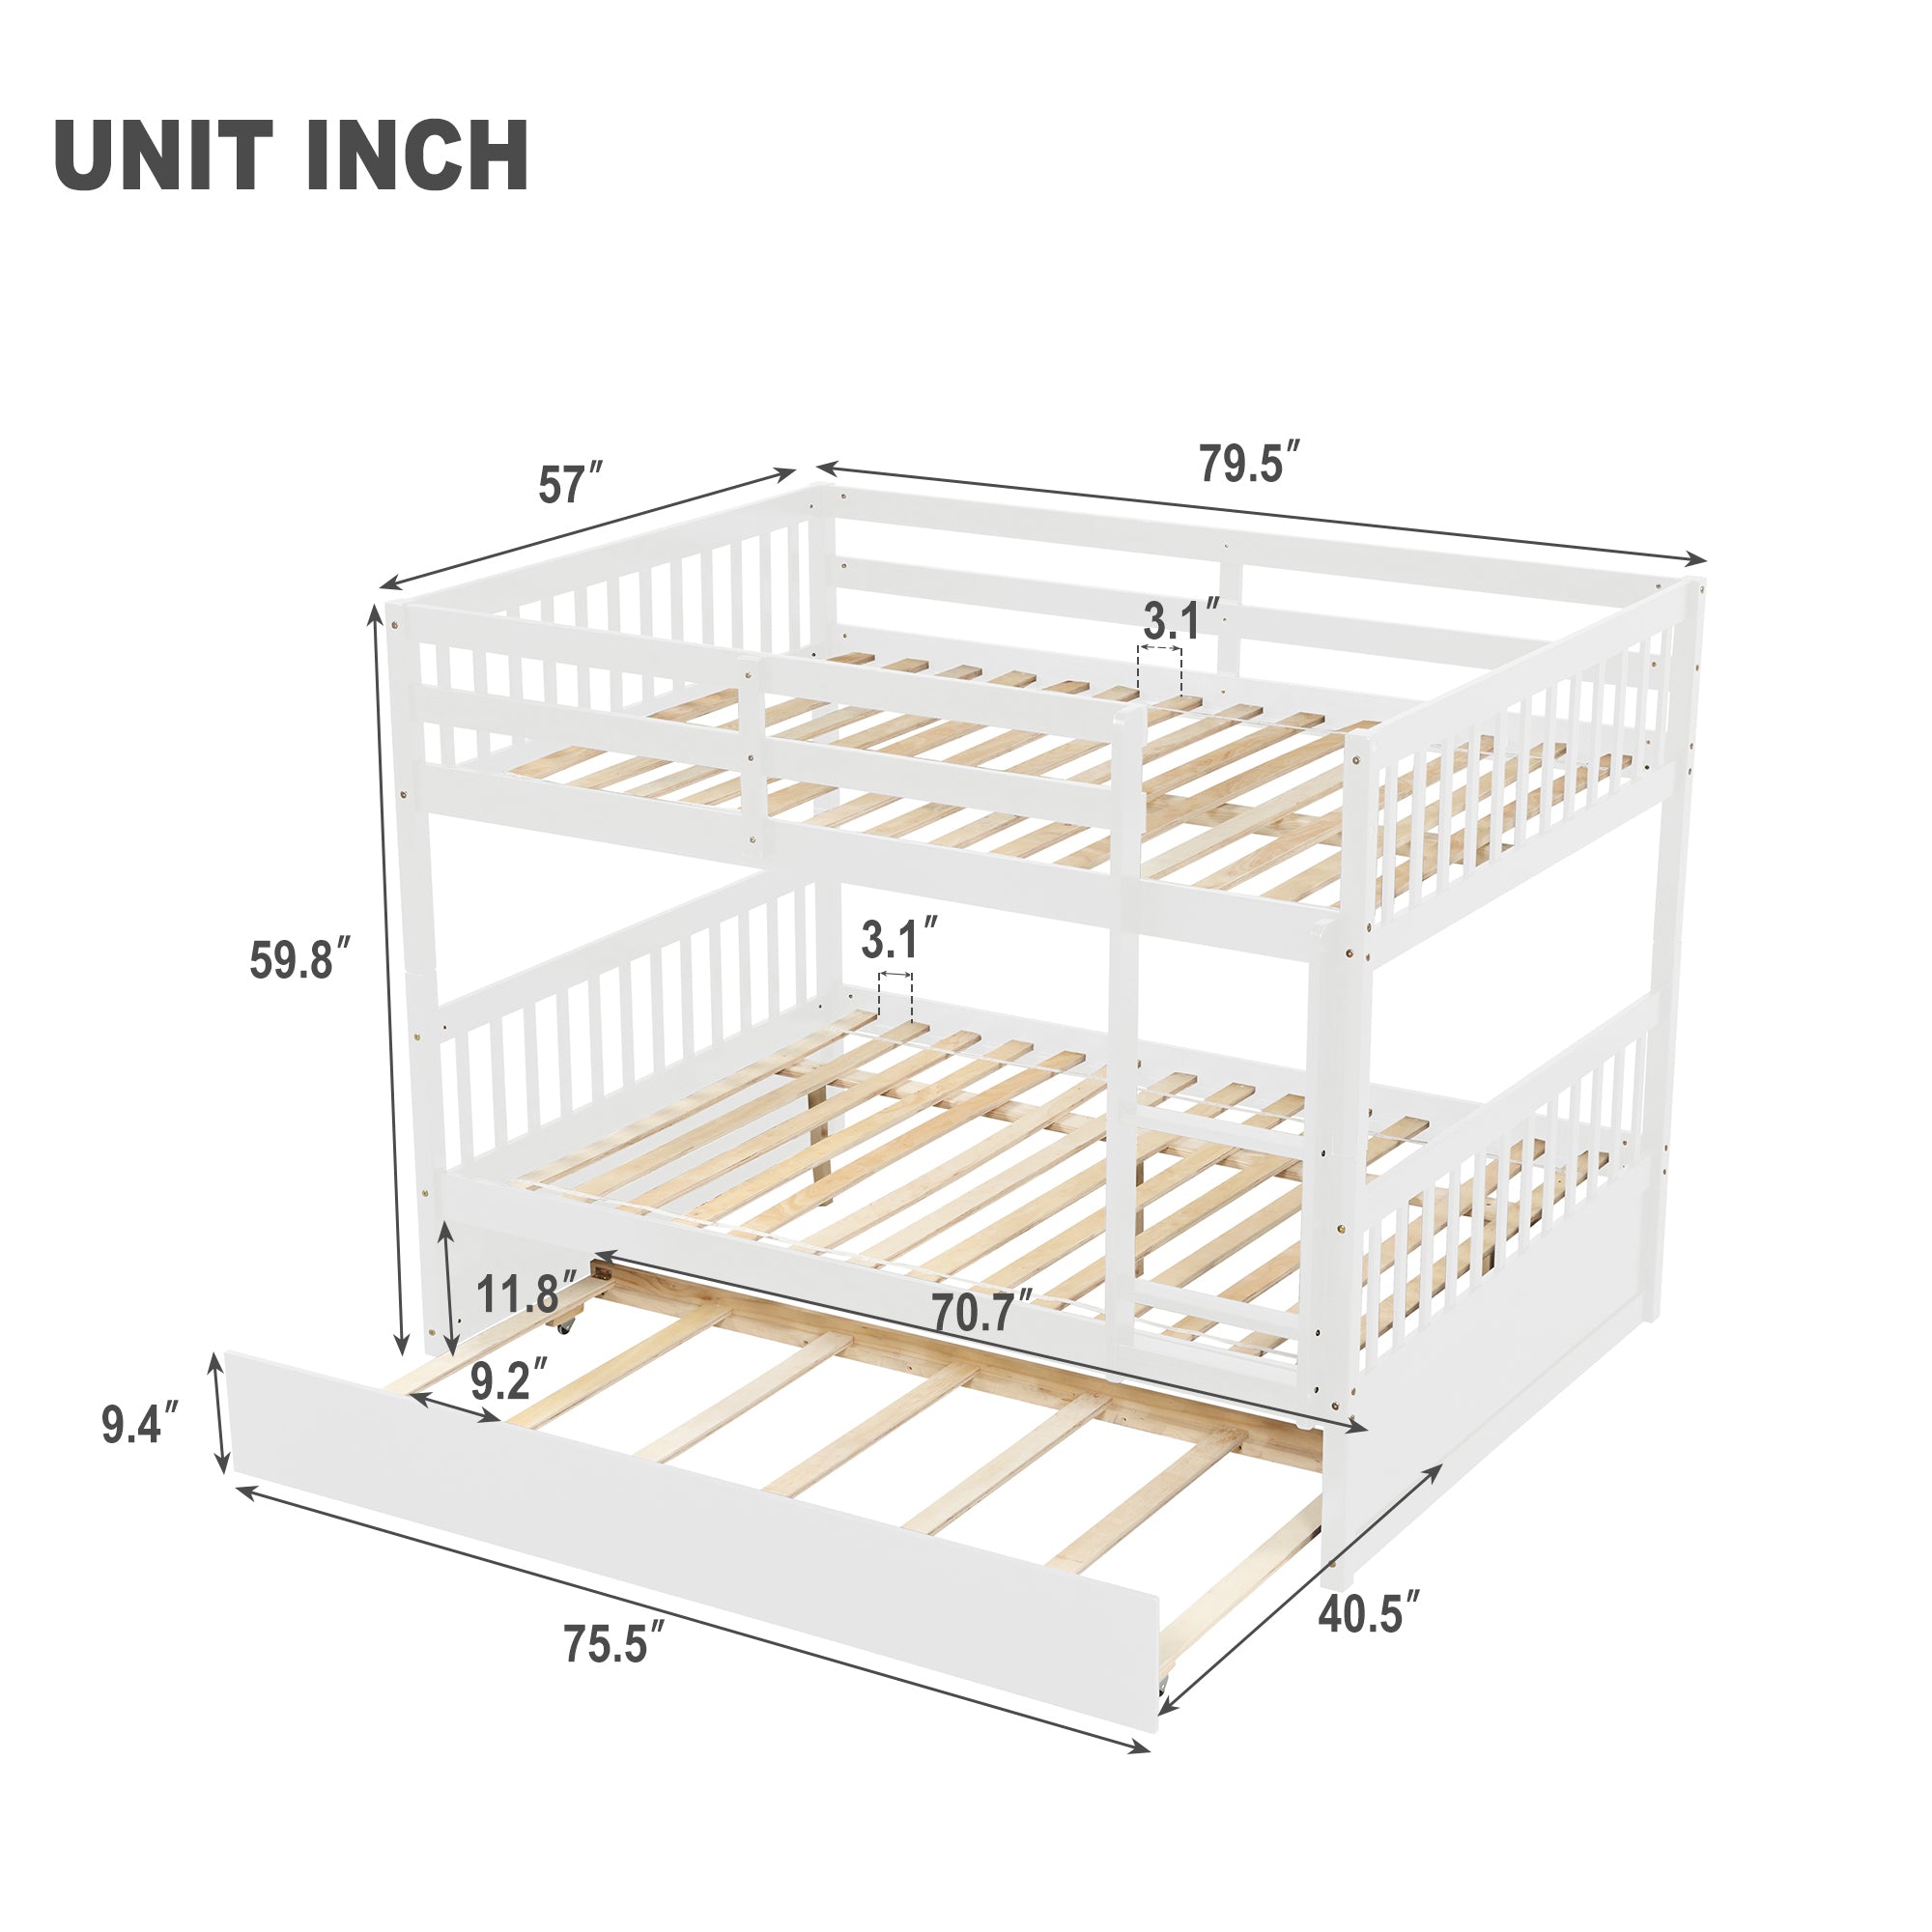 Full Over Full Bunk Bed with Trundle (White)